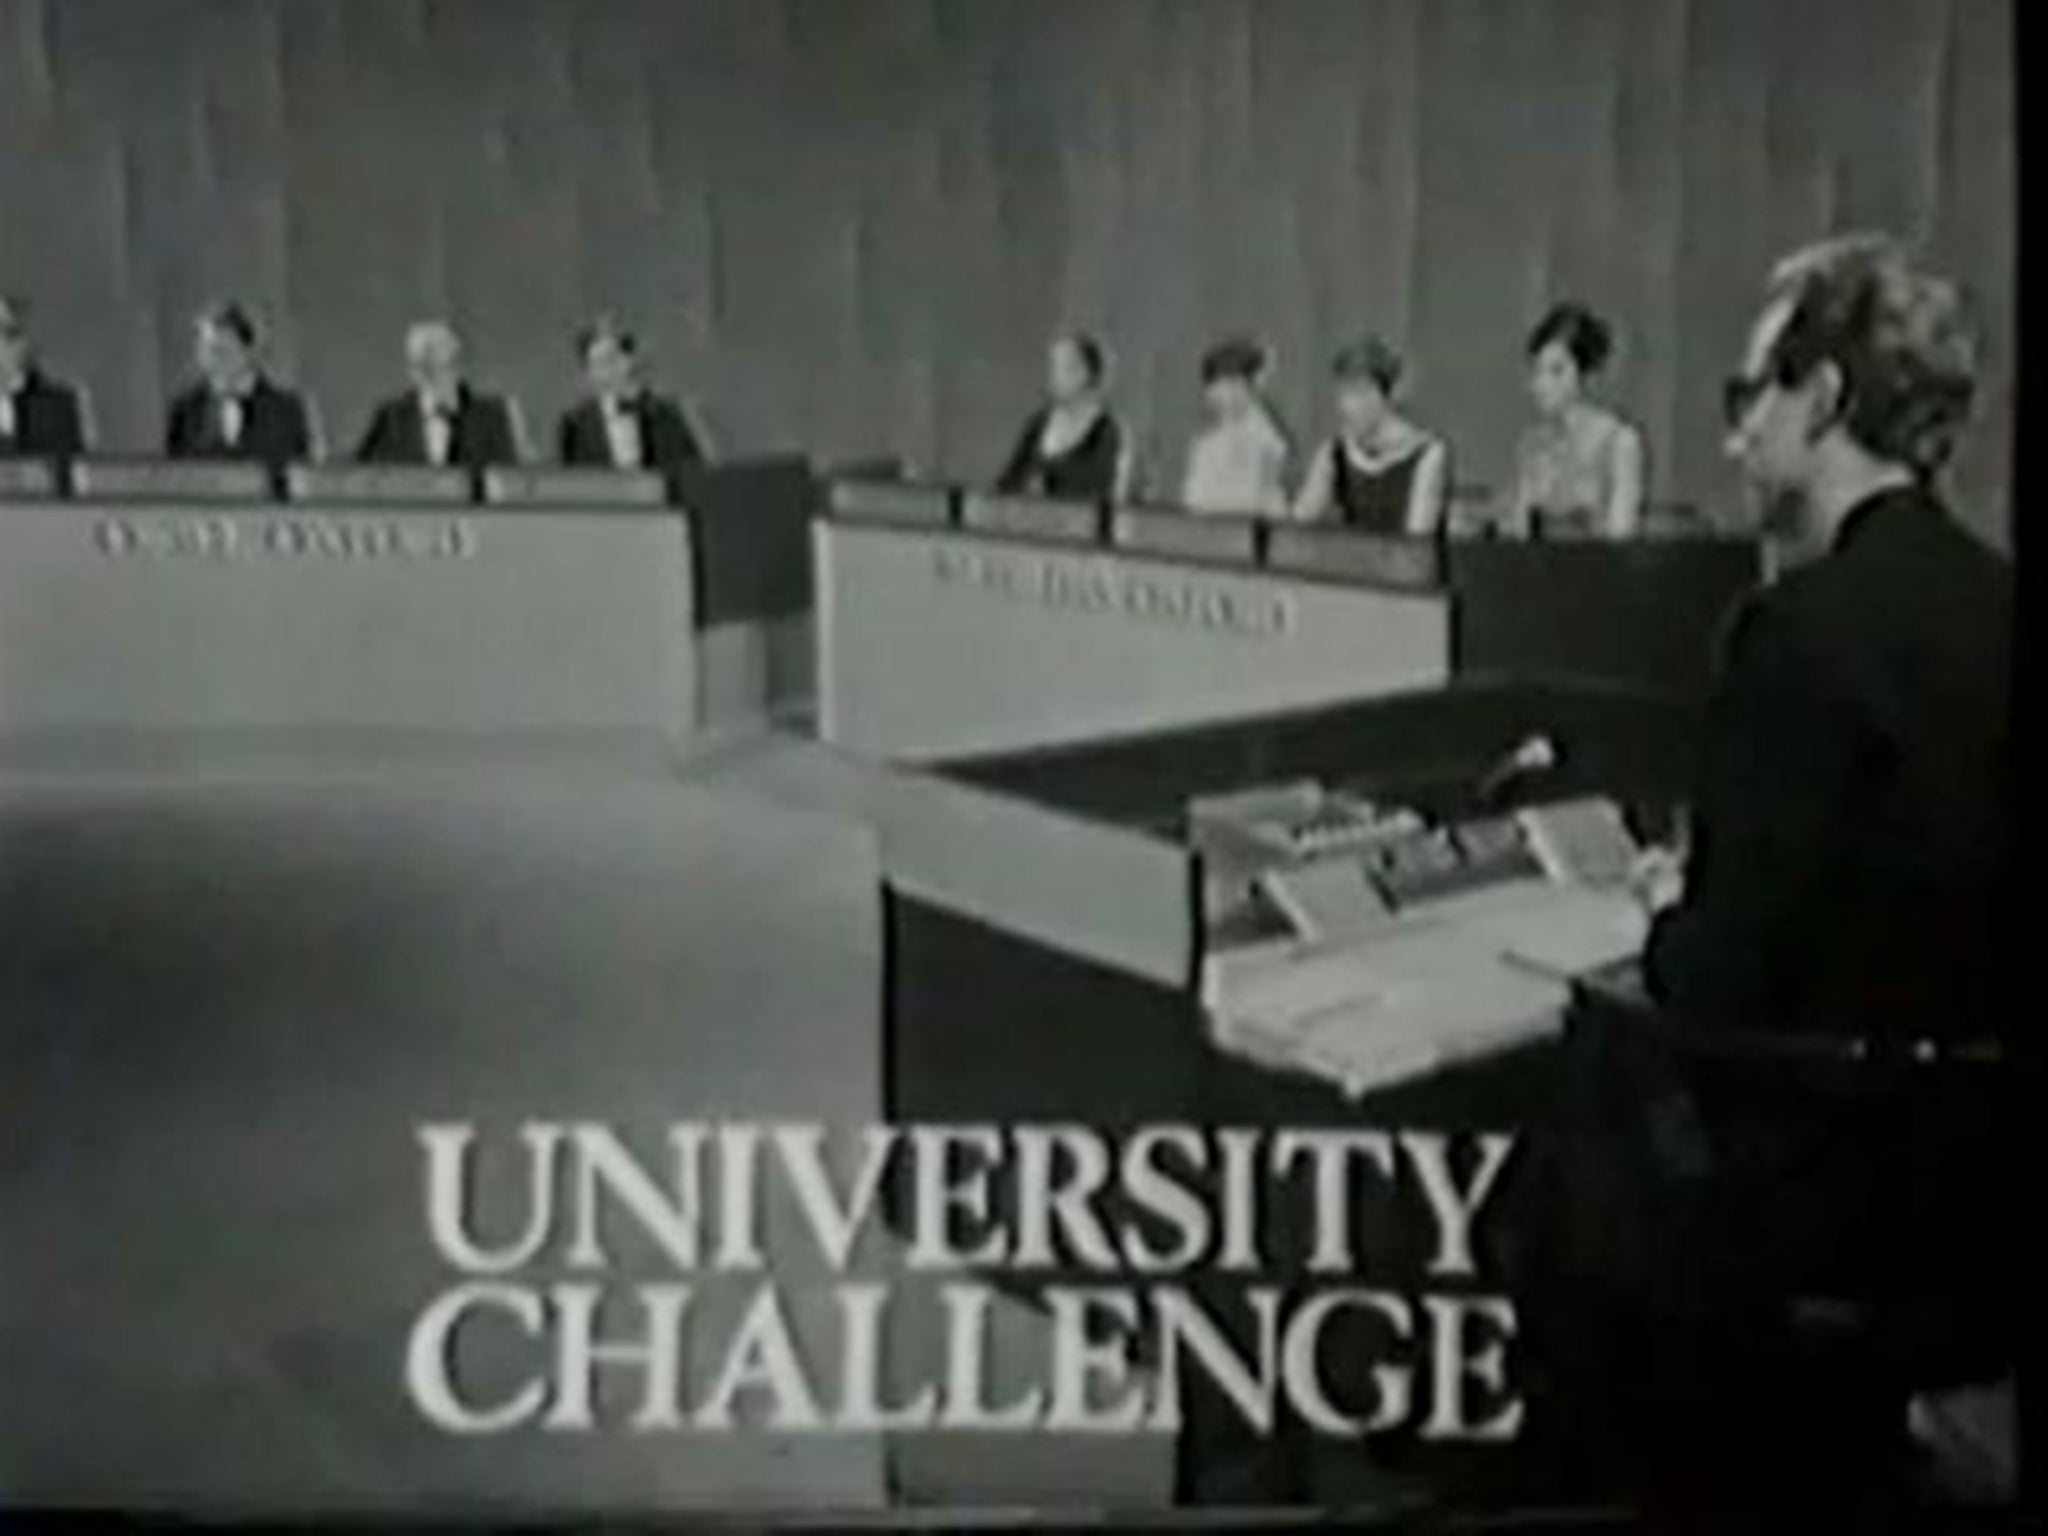 University Challenge was first broadcast in 1962 but is undergoing a renaissance in viewership